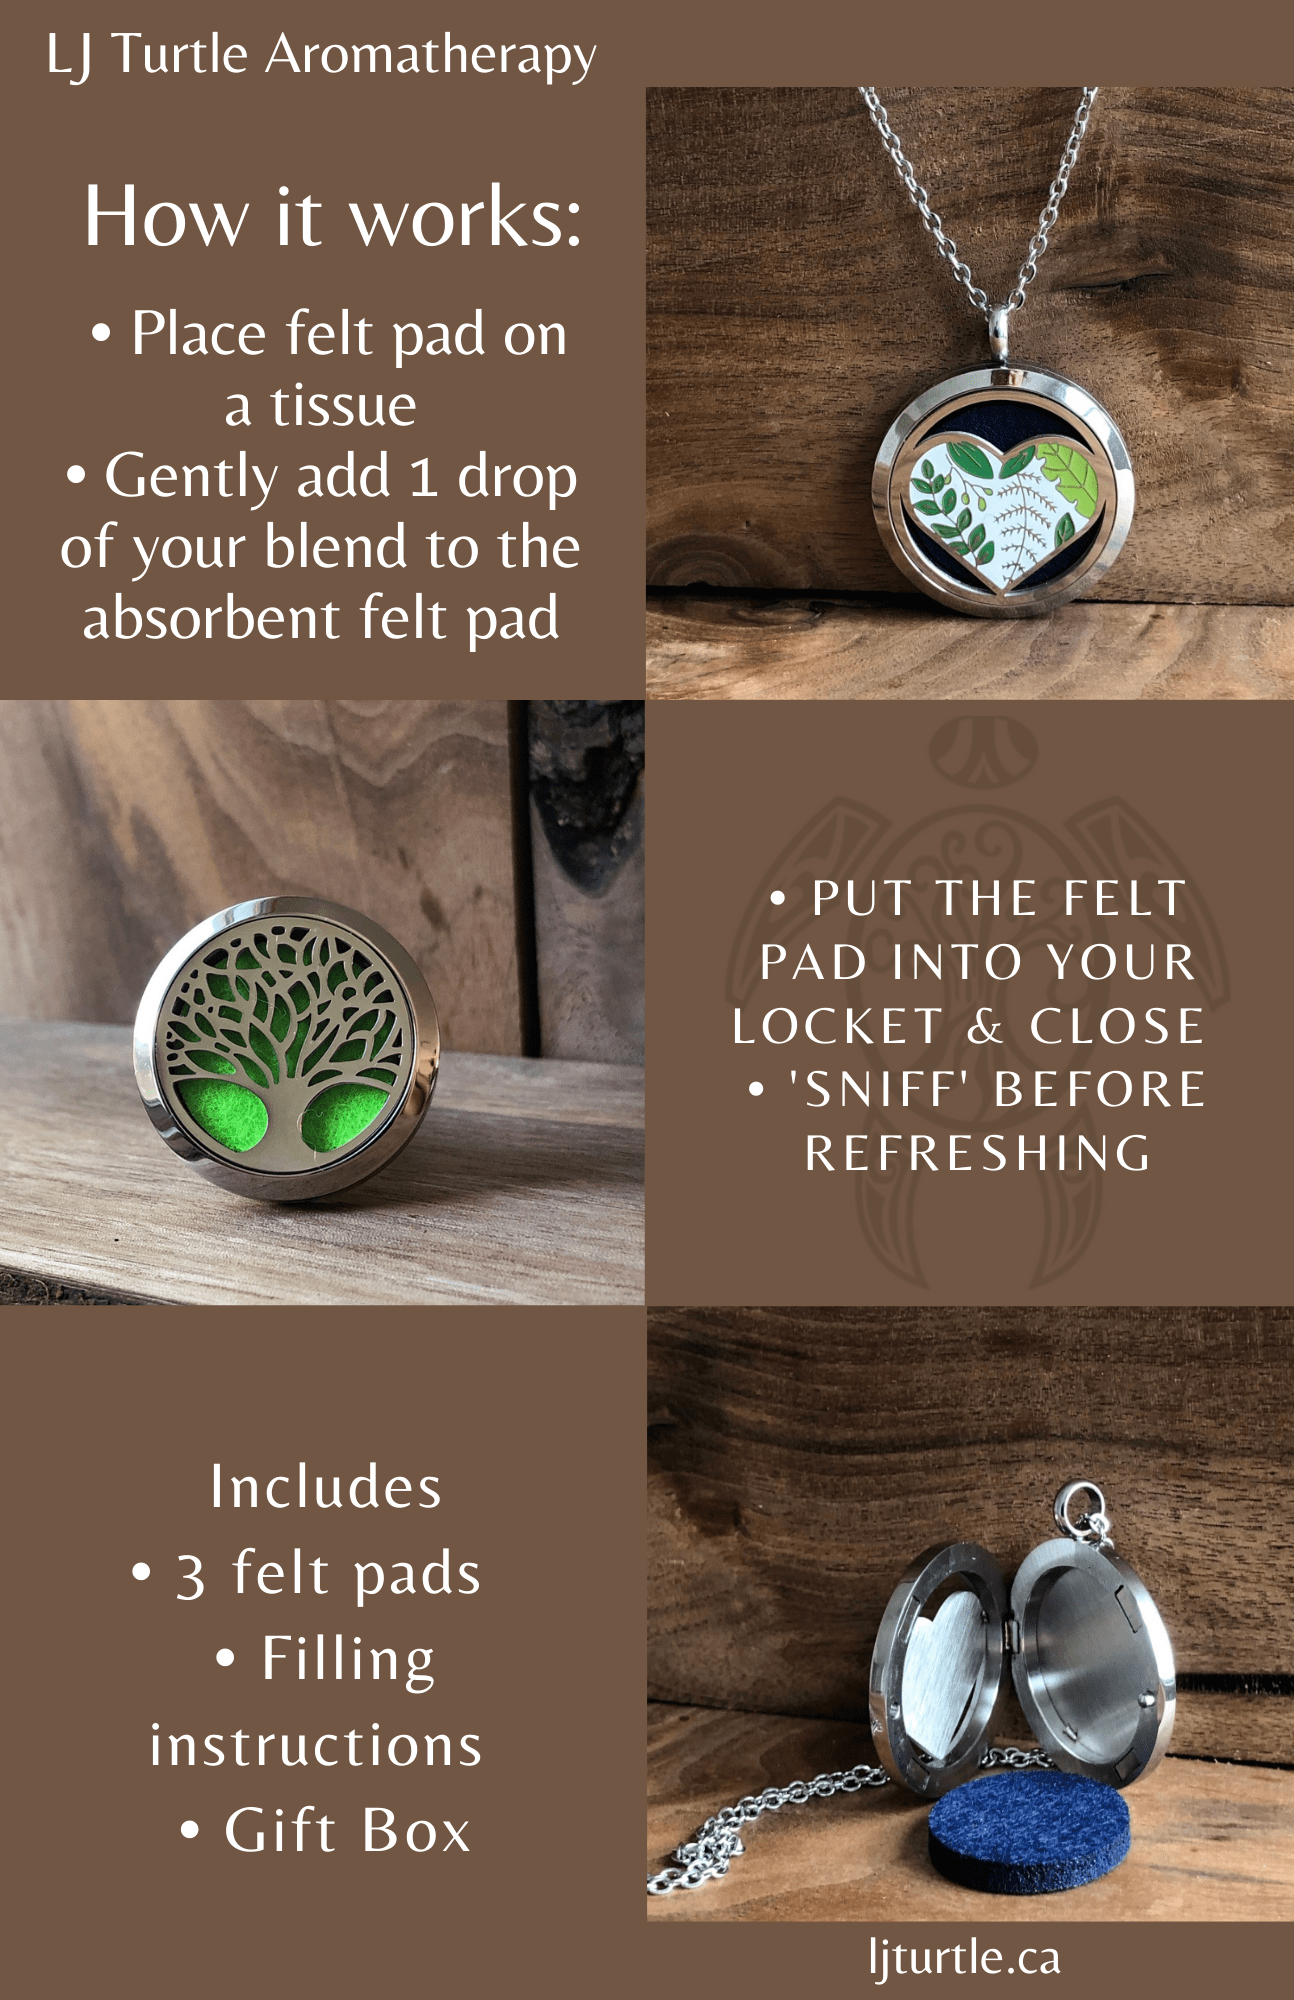 LJ Turtle Aromatherapy & Accessories Bird on a Branch | Stainless Steel